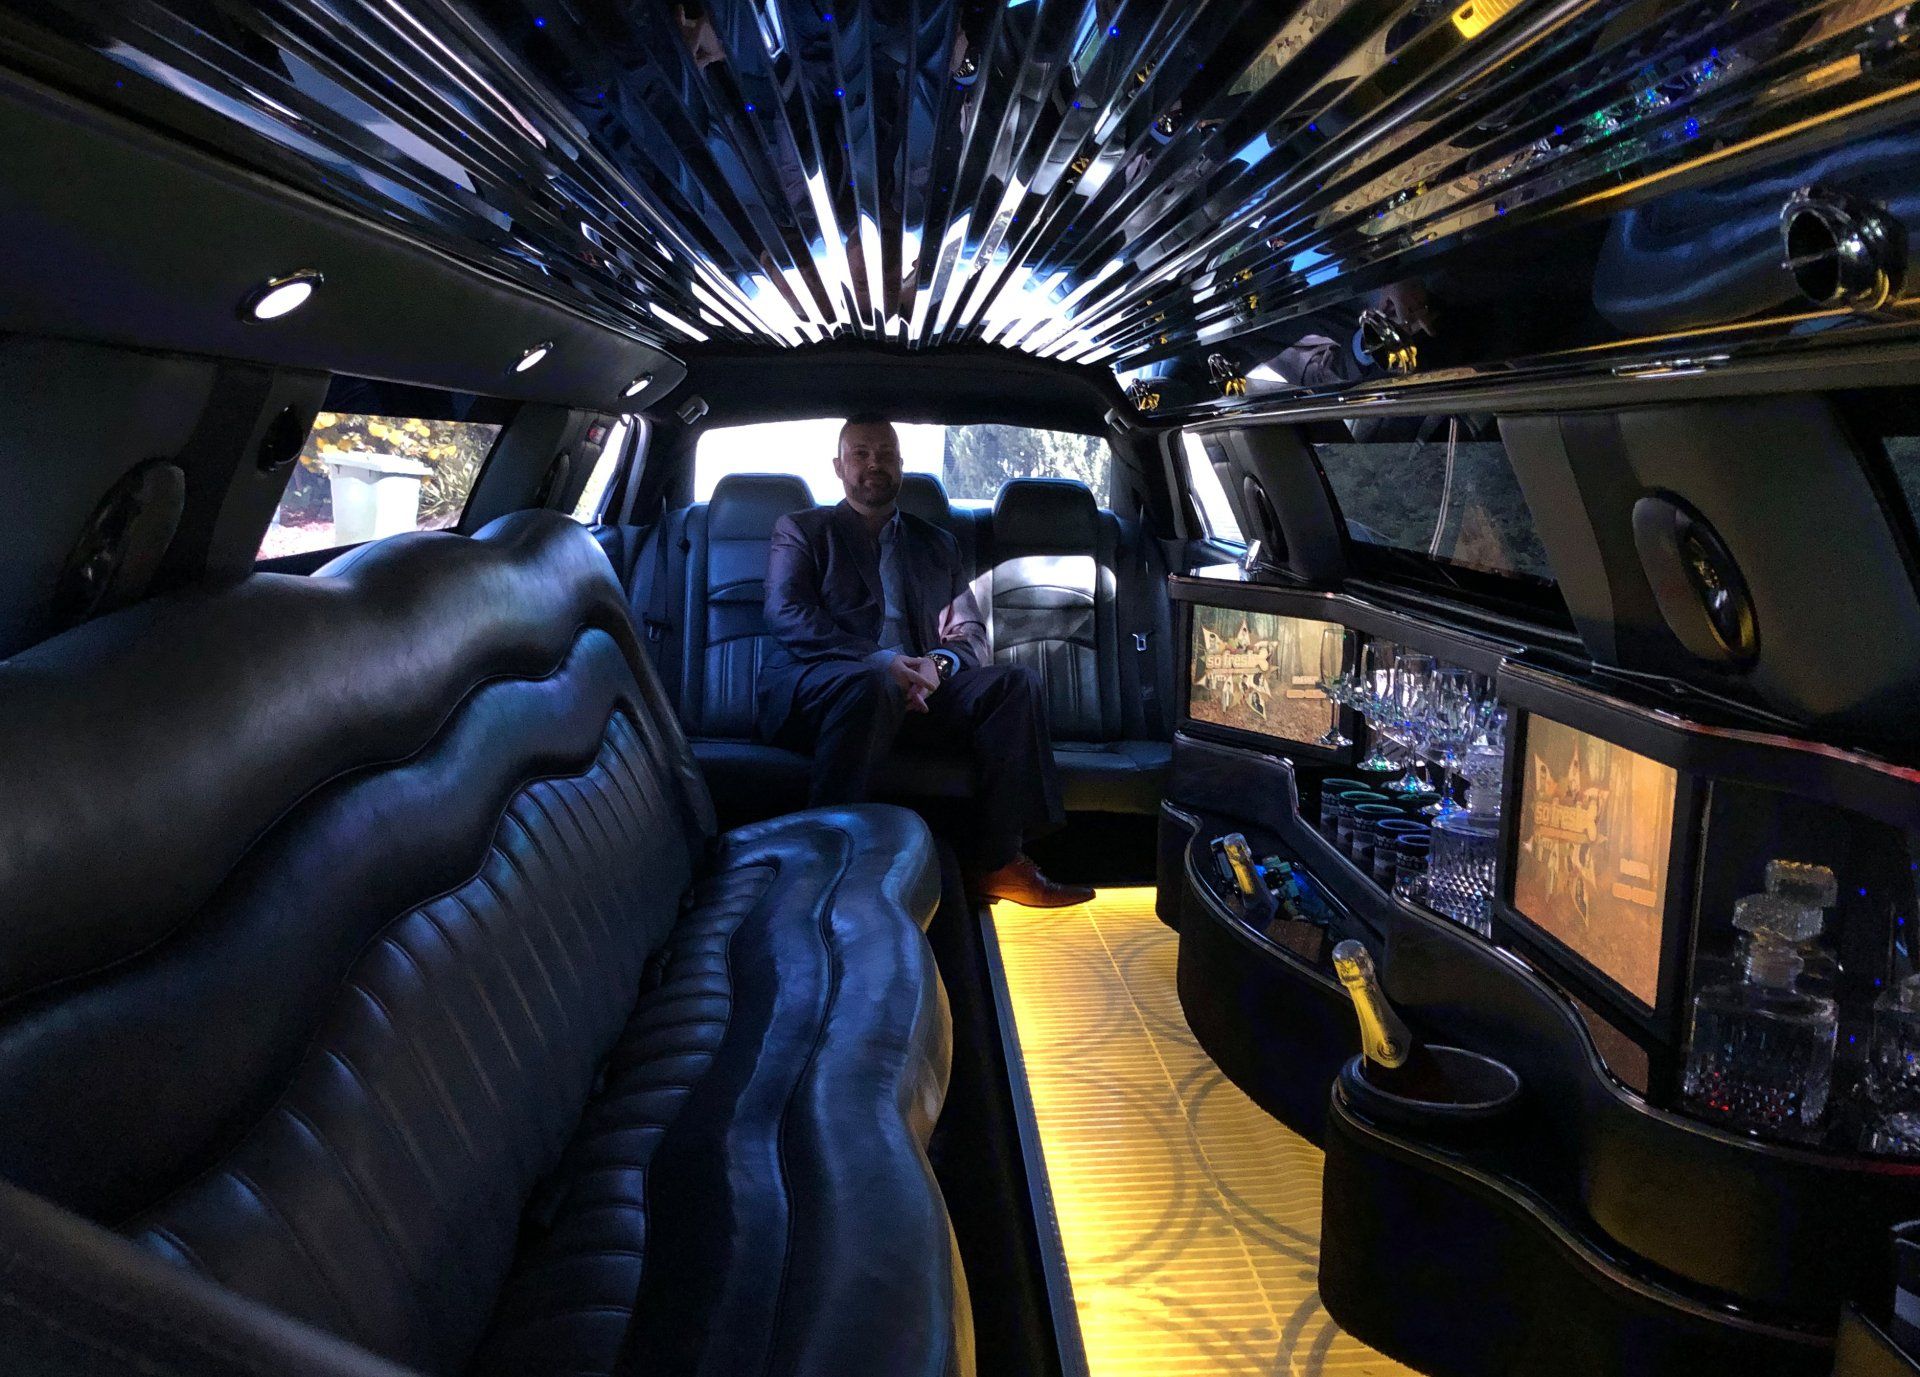 Groom Inside The Luxury Limousine — Superstretch300 Limousines in Golden Beach, QLD